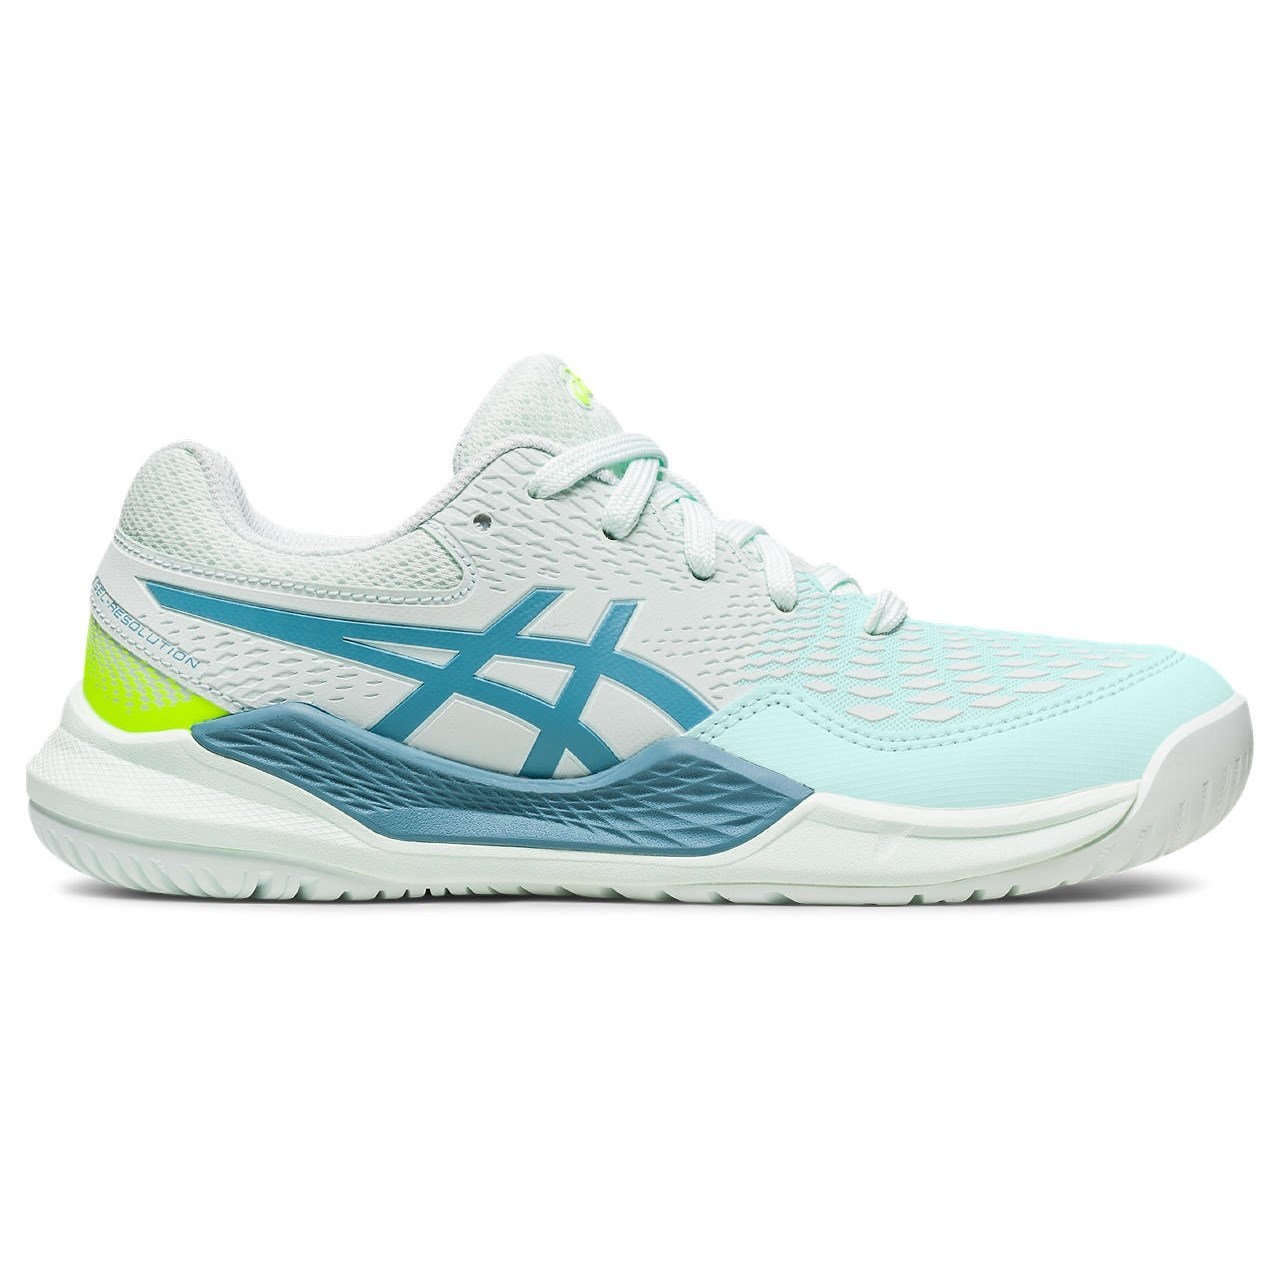 Asics Gel Resolution 9 GS - Kids Tennis Shoes - Soothing Sea/Gris Blue ...